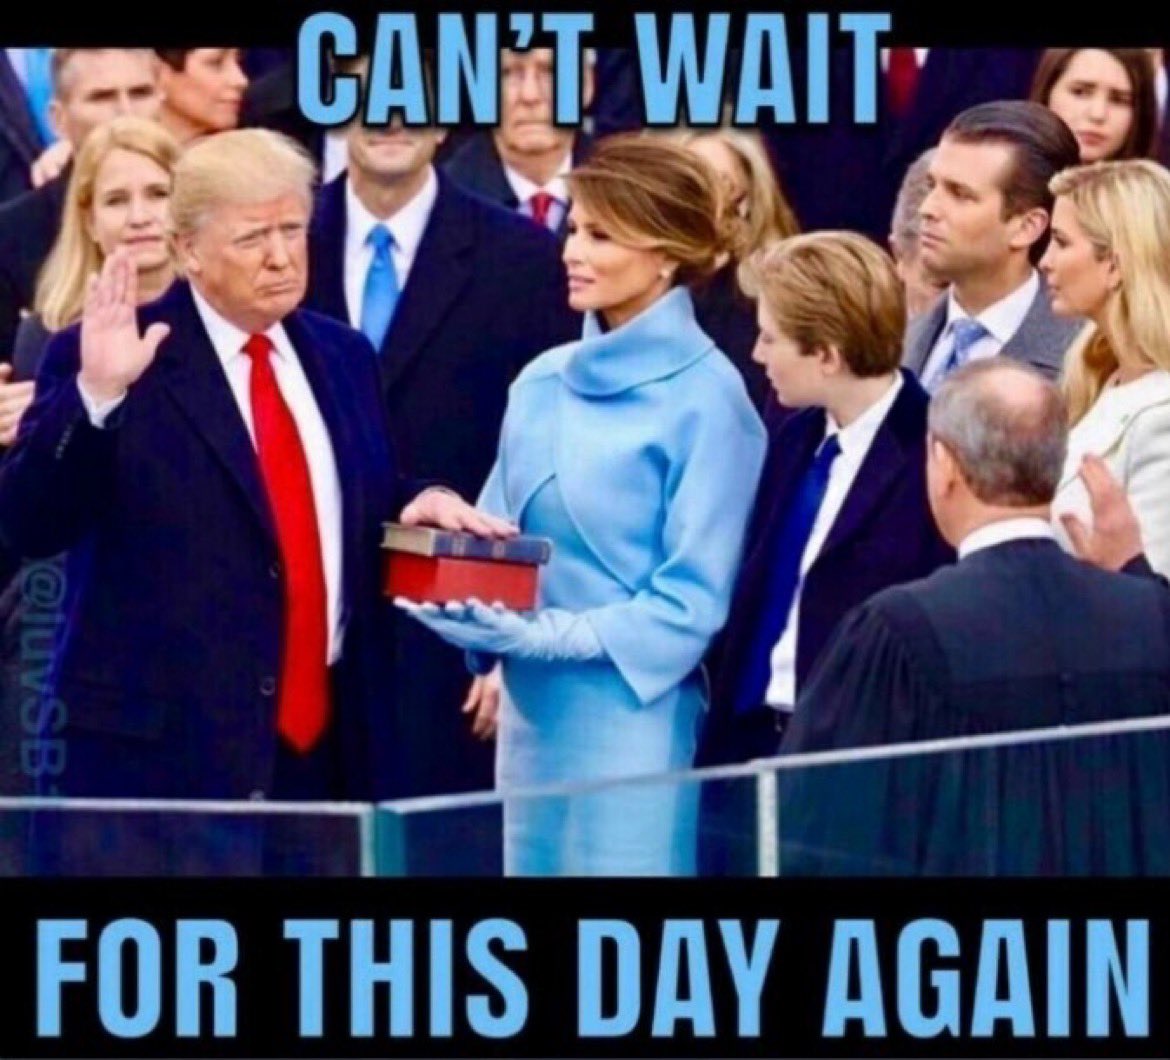 I know I can’t wait. #Trump2024